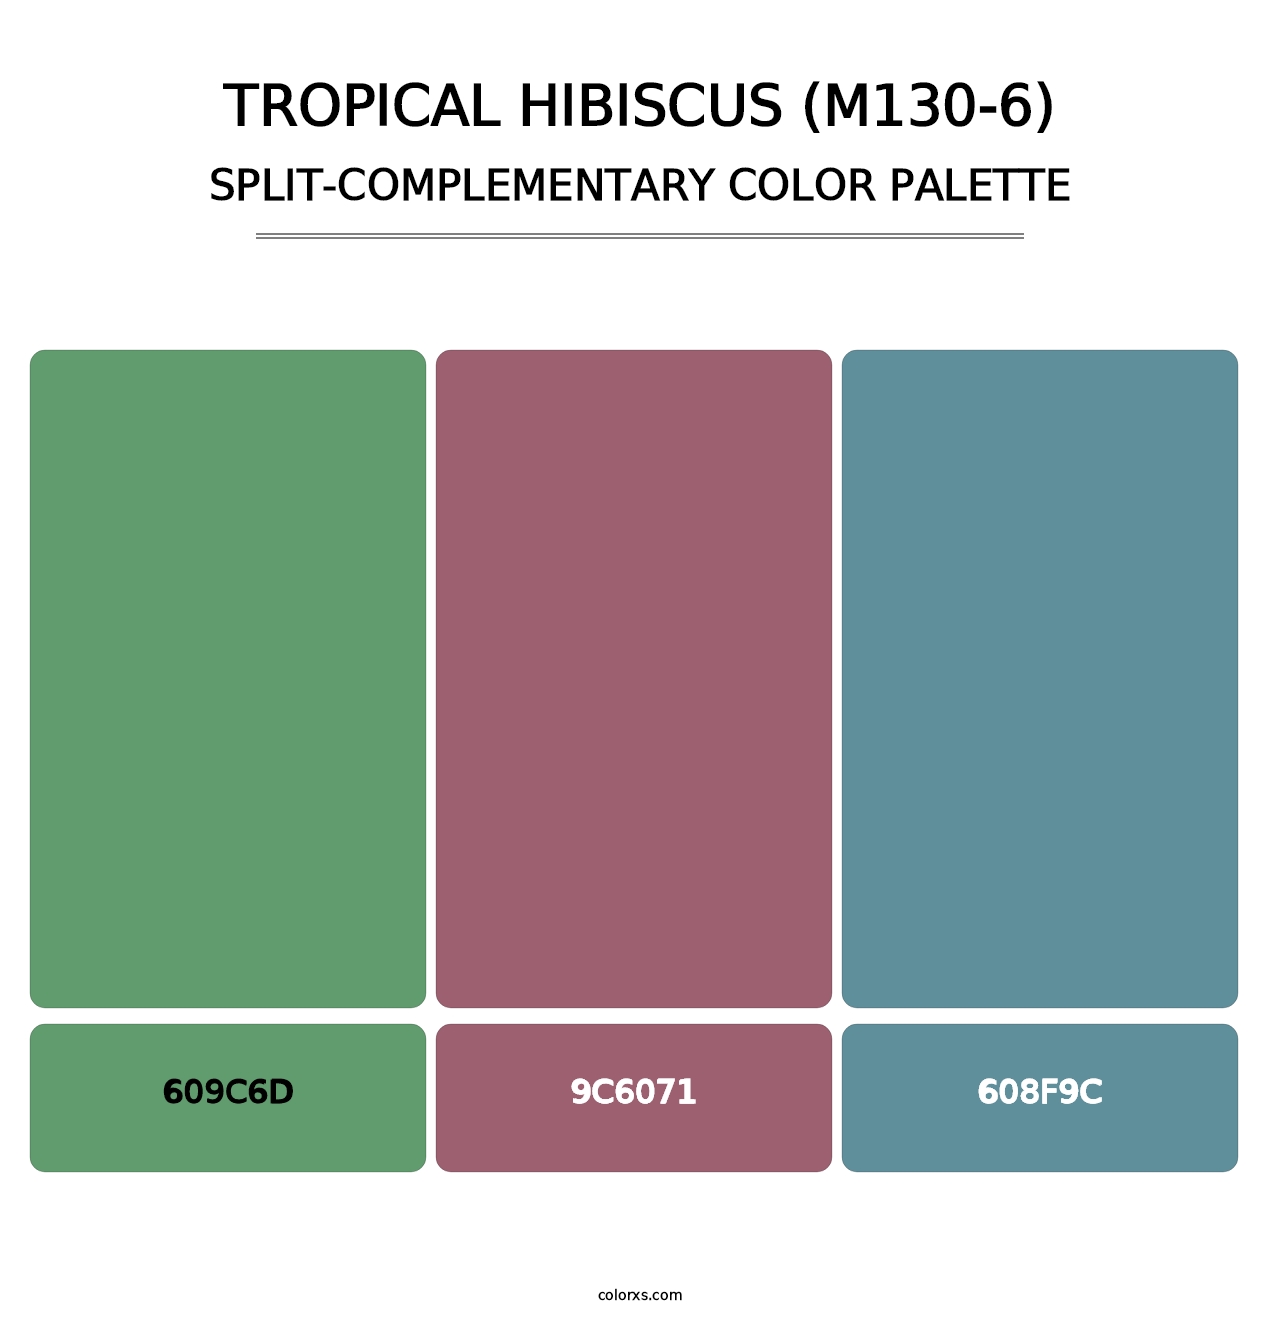 Tropical Hibiscus (M130-6) - Split-Complementary Color Palette